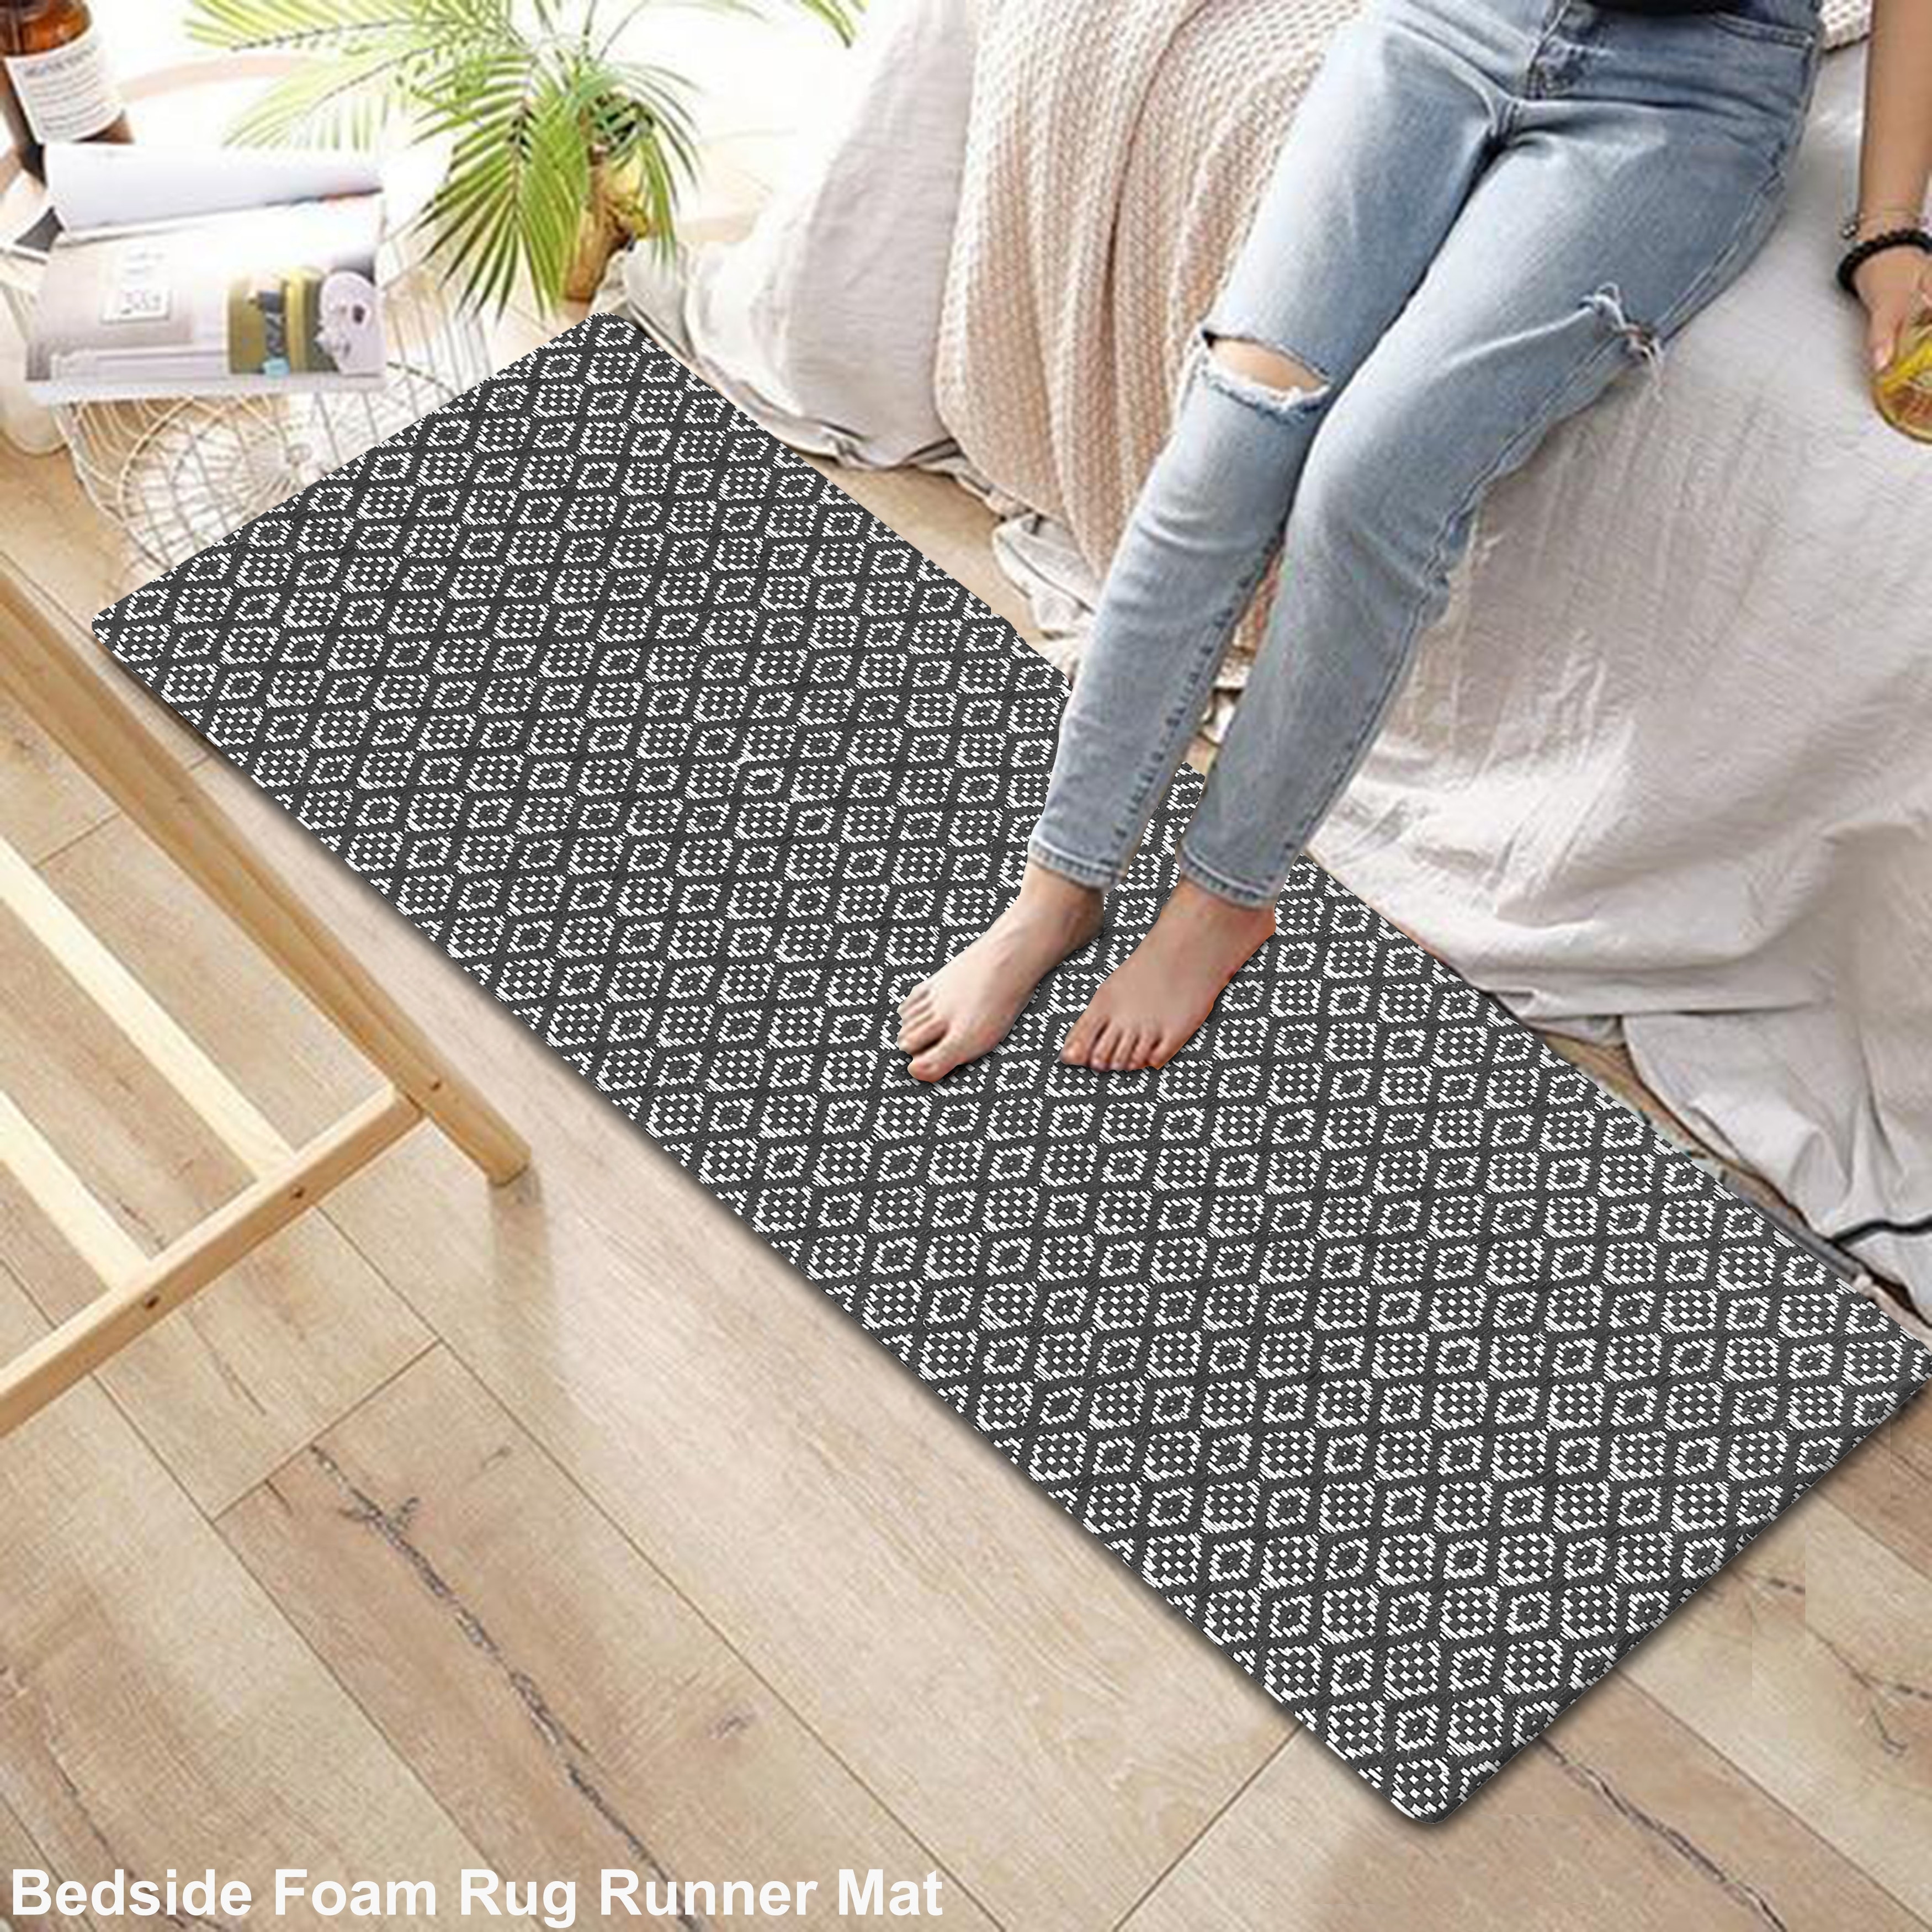 https://ak1.ostkcdn.com/images/products/is/images/direct/4bc853ba8e12619d639b7ccefe65d7968bc88b0b/Kitchen-Runner-Rug--Mat-Cushioned-Cotton-Hand-Woven-Anti-Fatigue-Mat-Kitchen-Bathroom-Bed-side-18x48%27%27.jpg